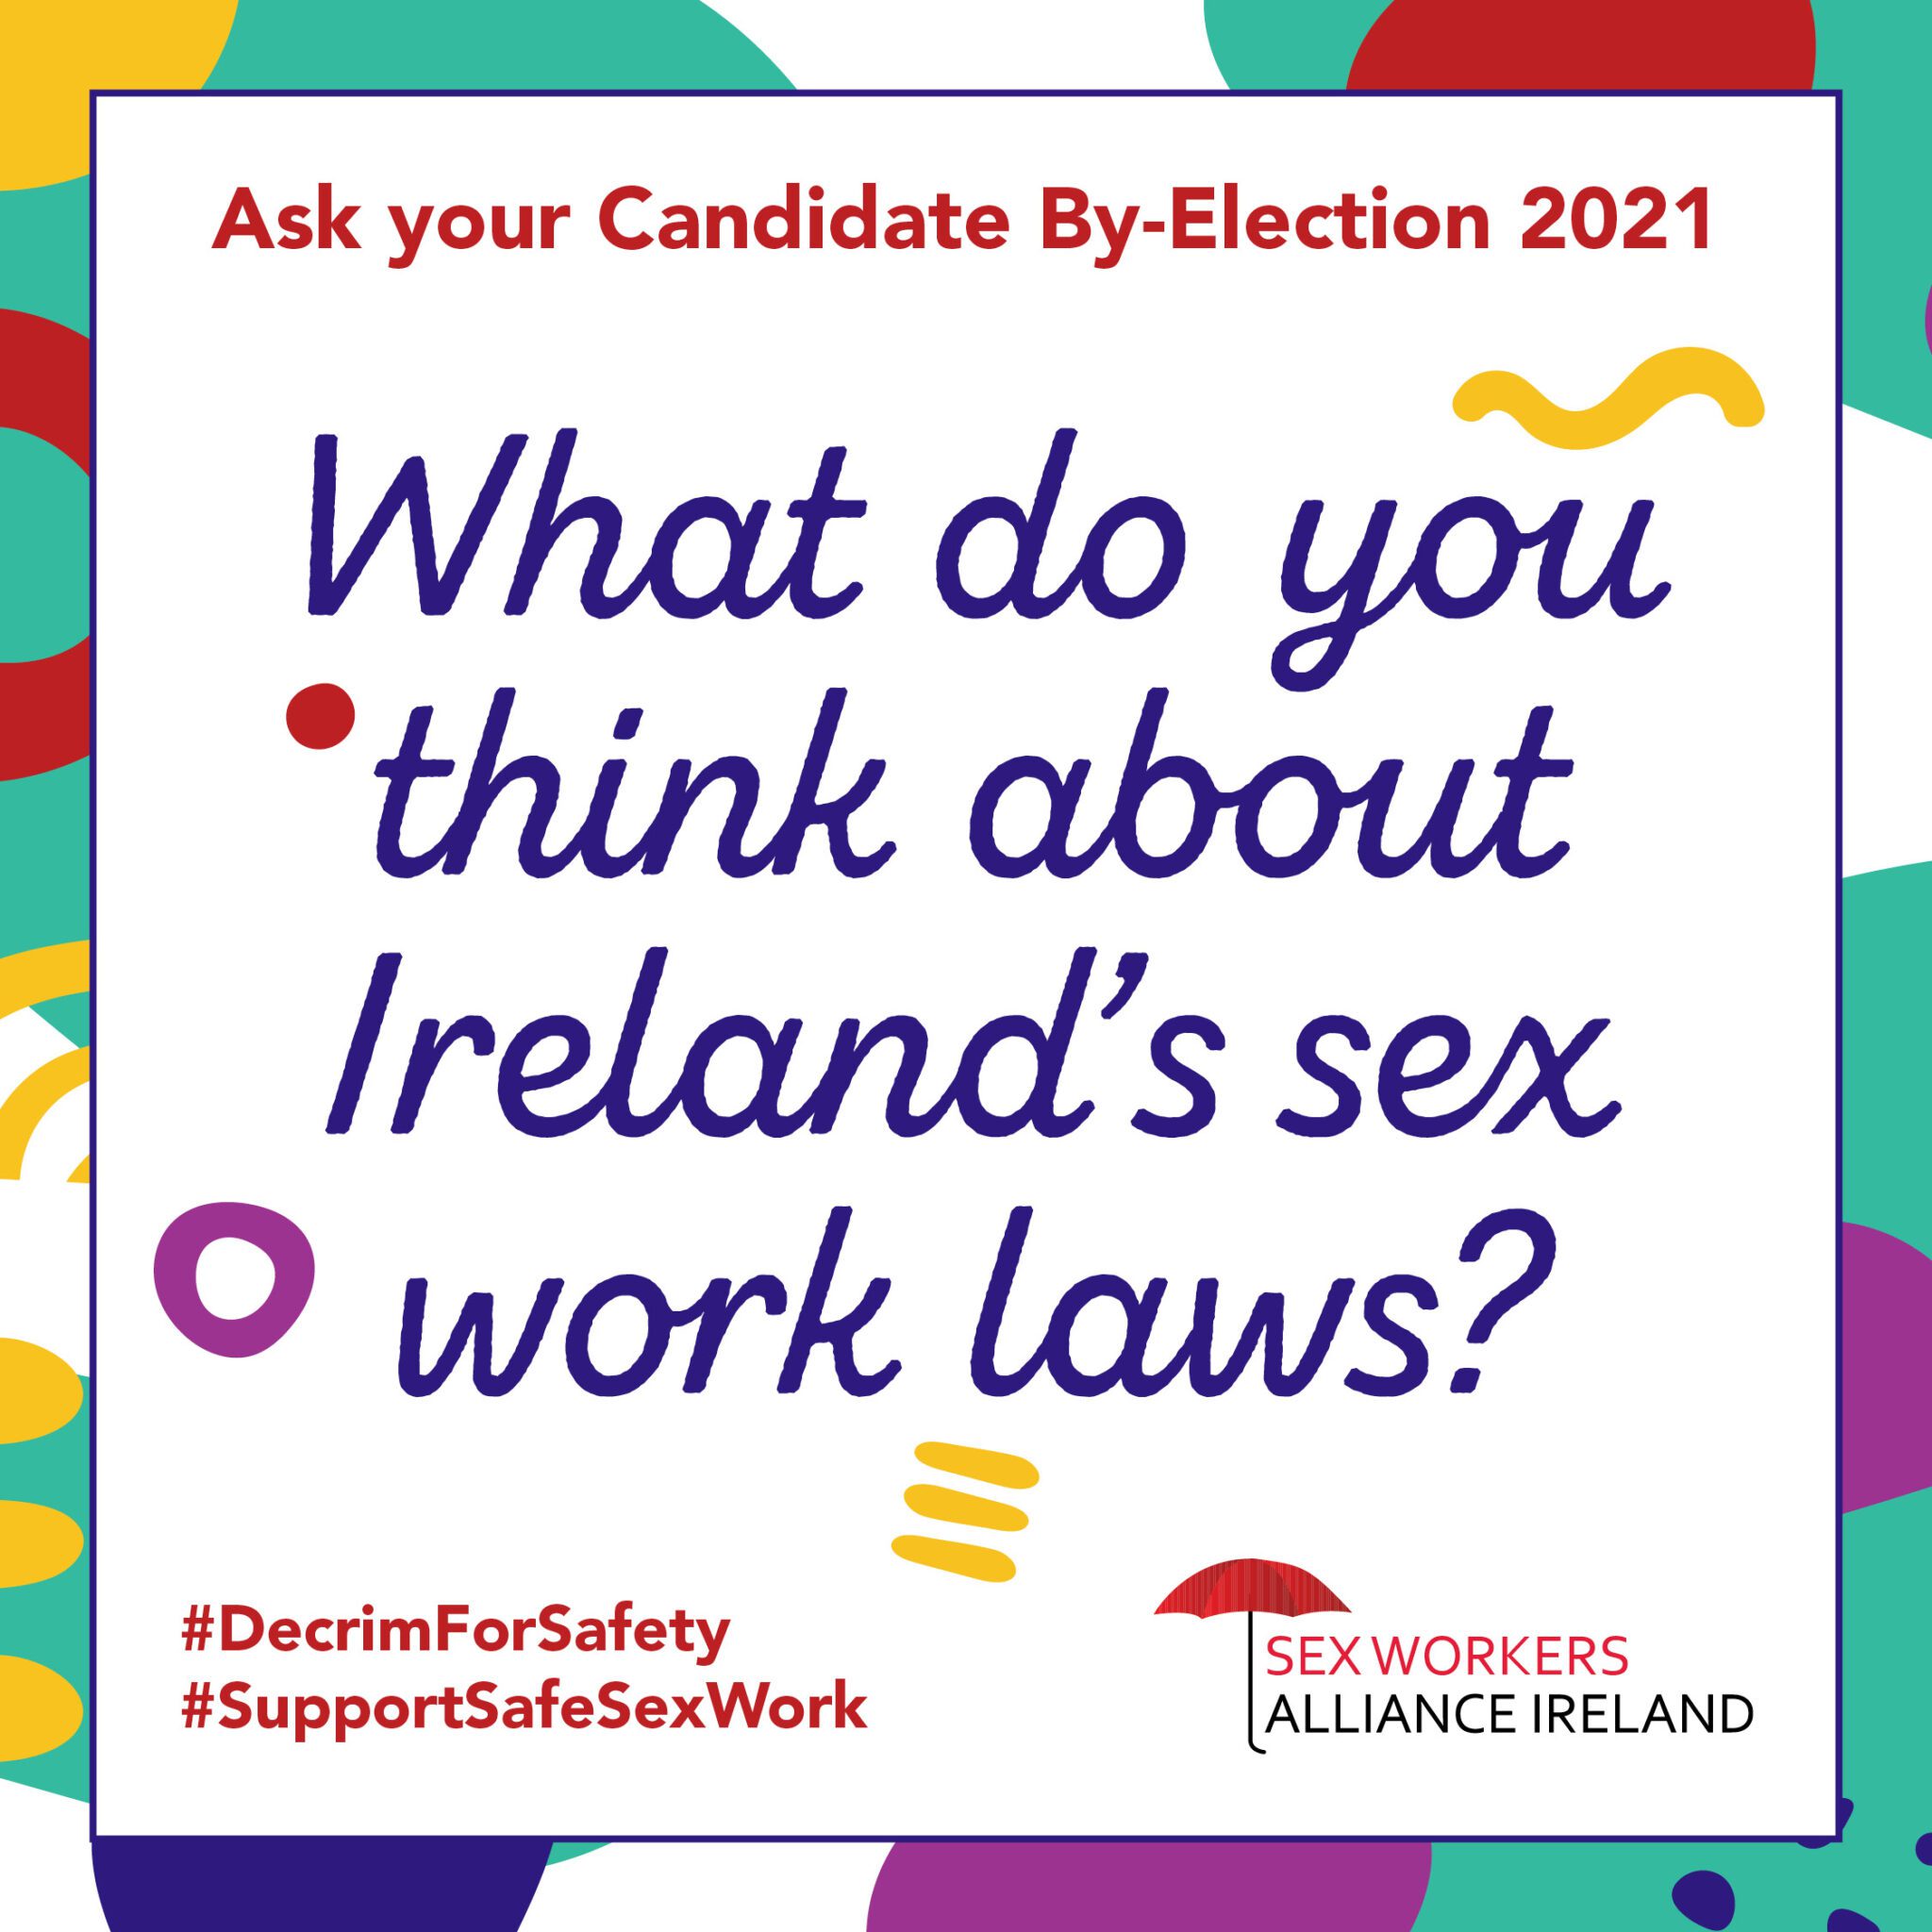 Ask Your Candidate By Election 2021 Sex Workers Alliance Ireland